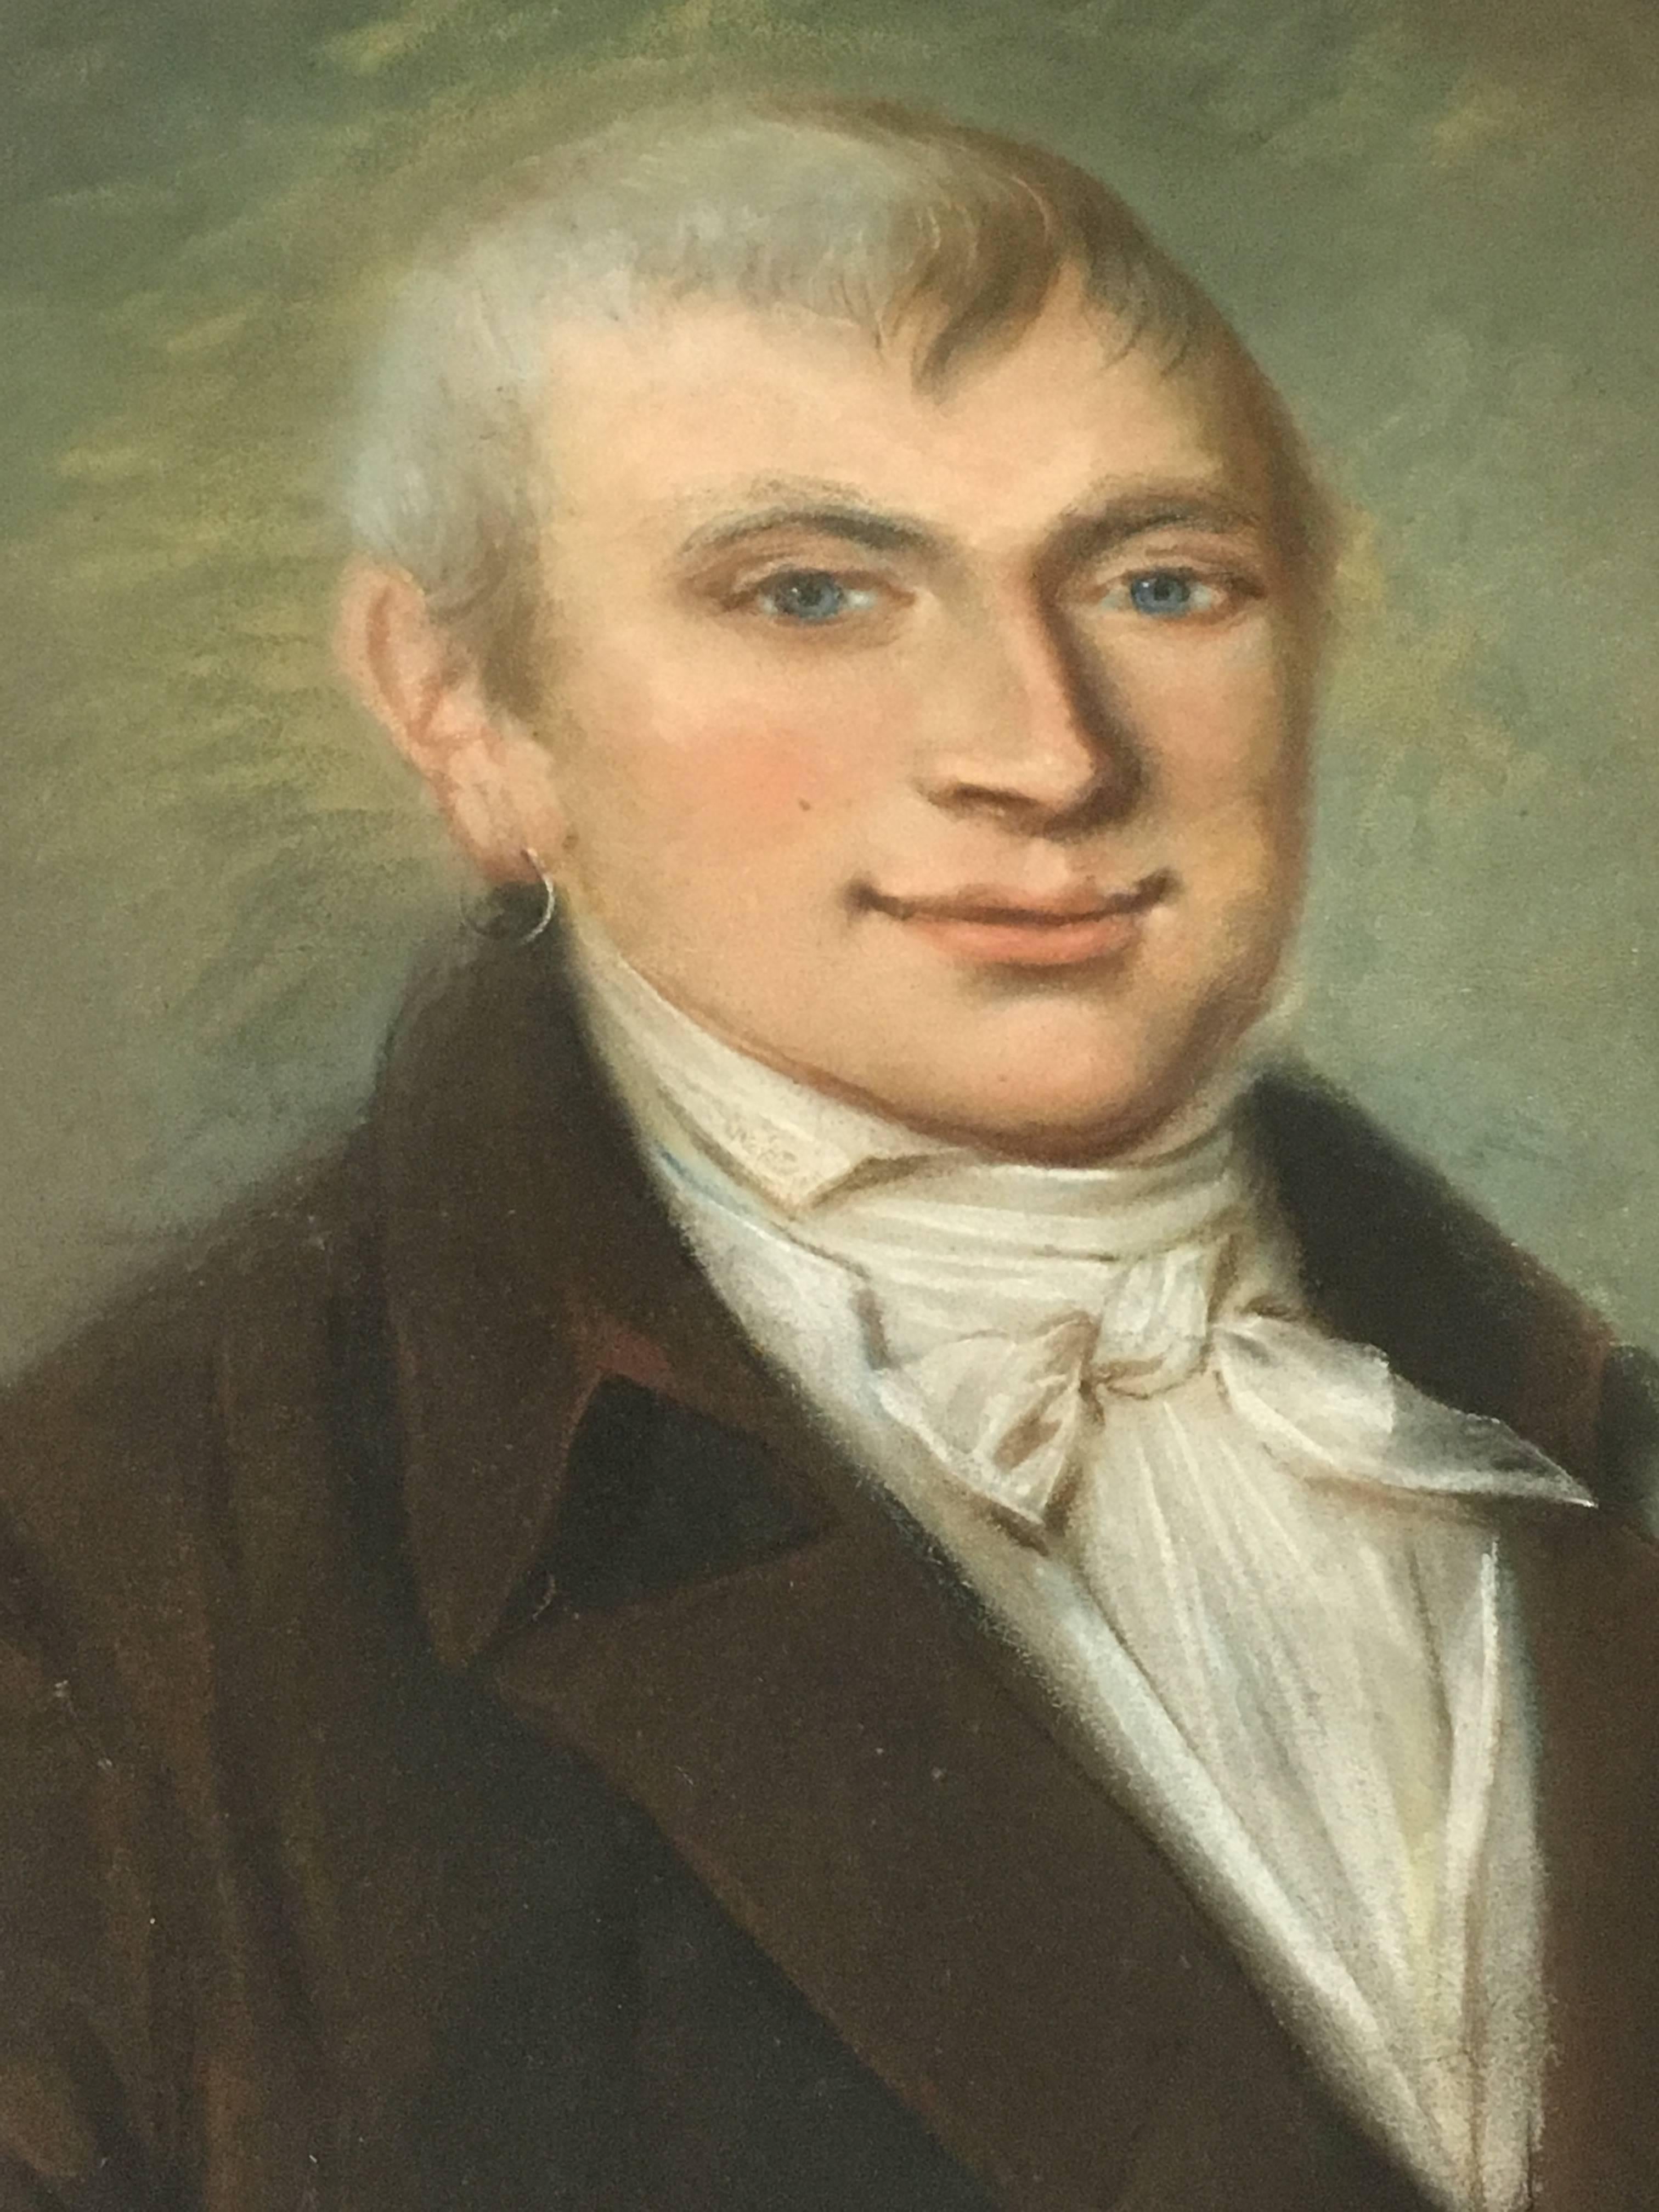 A charming portrait of a young Empire period gentleman with an earring, under glass in a period gild wood frame. Oil pastel on paper, French, circa 1800.